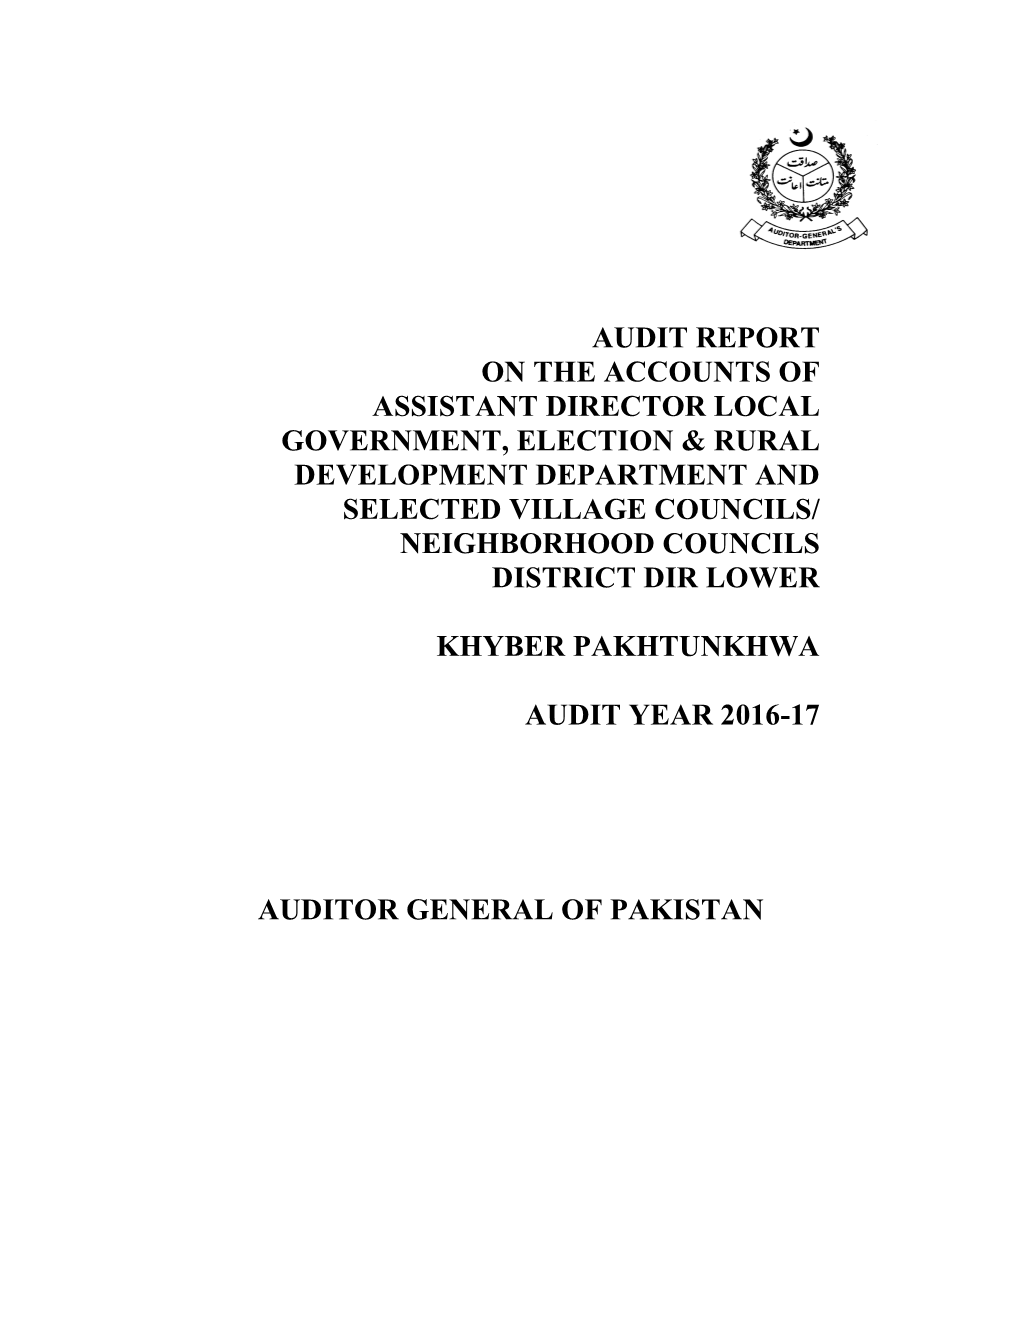 Audit Report on the Accounts of Assistant Director